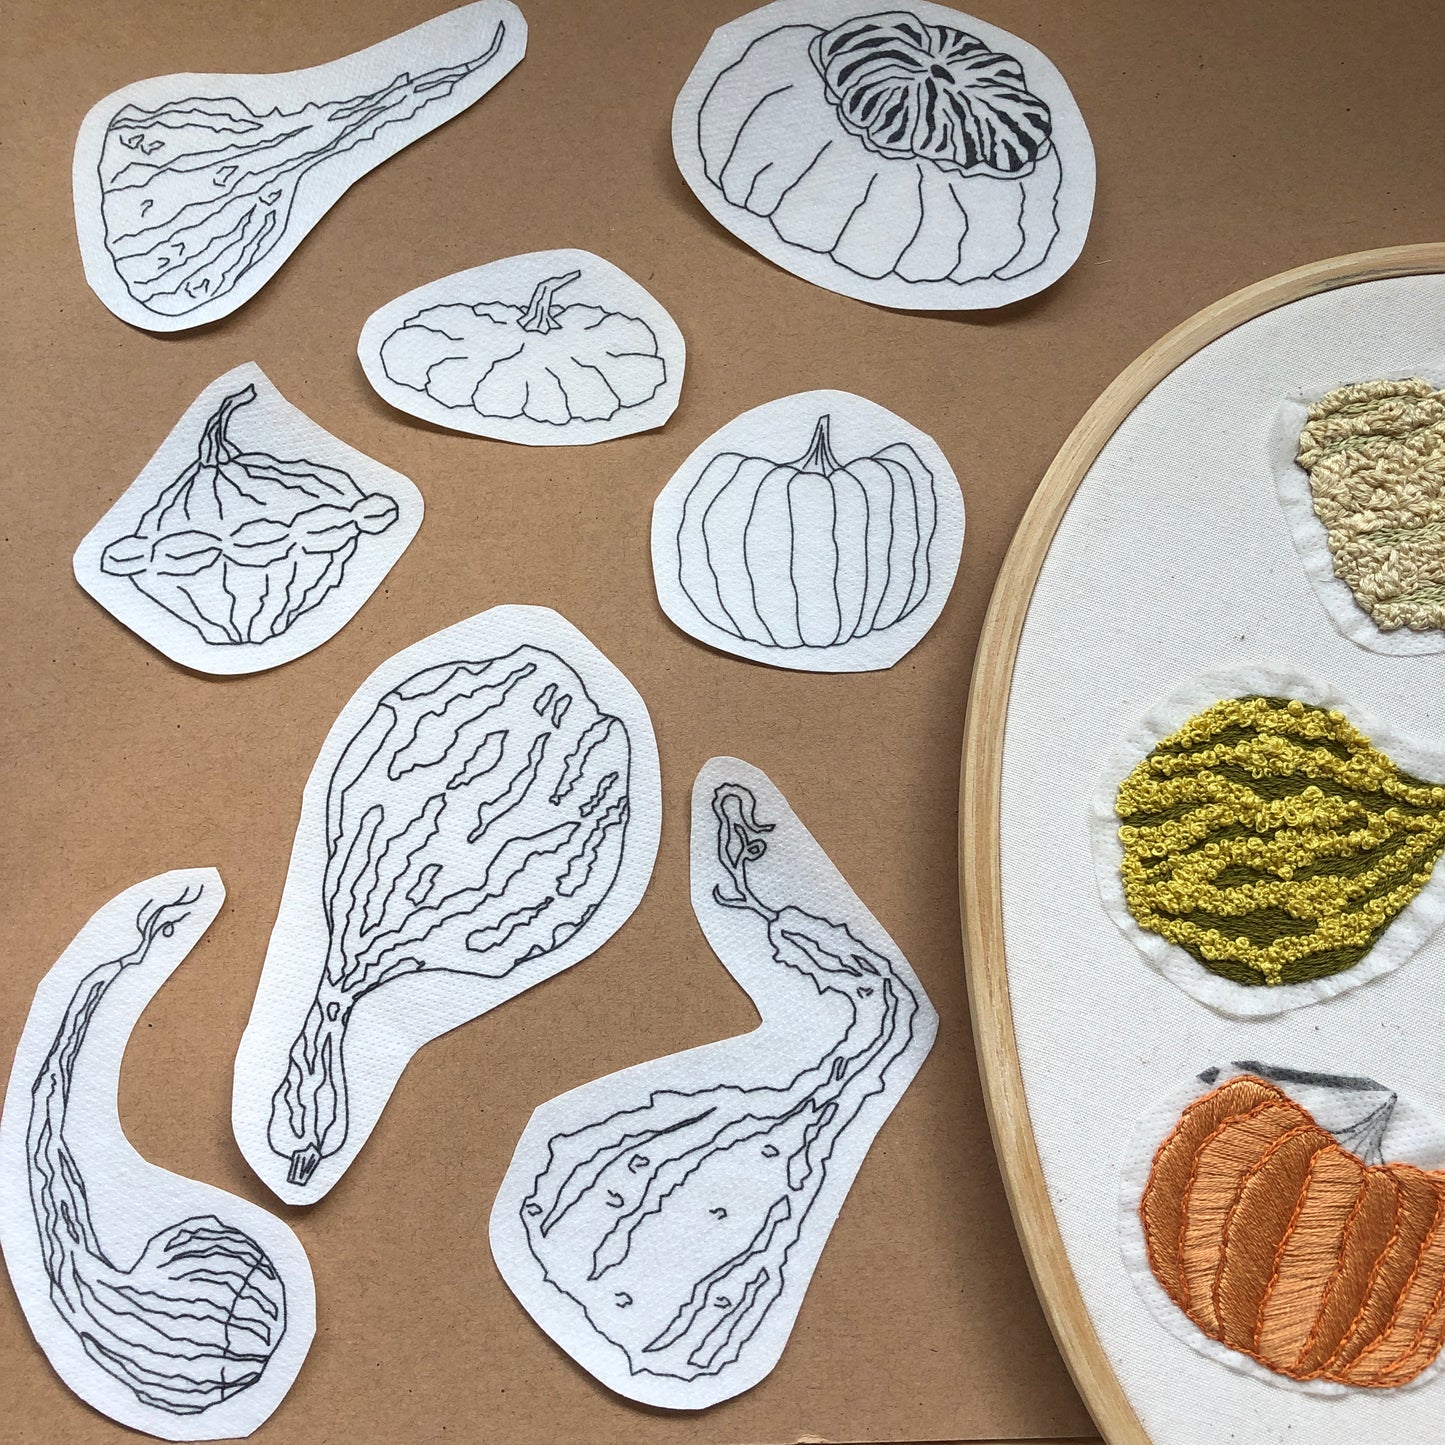 Gourds - Peel Stick and Stitch Hand Embroidery Patterns for DIY Crafting